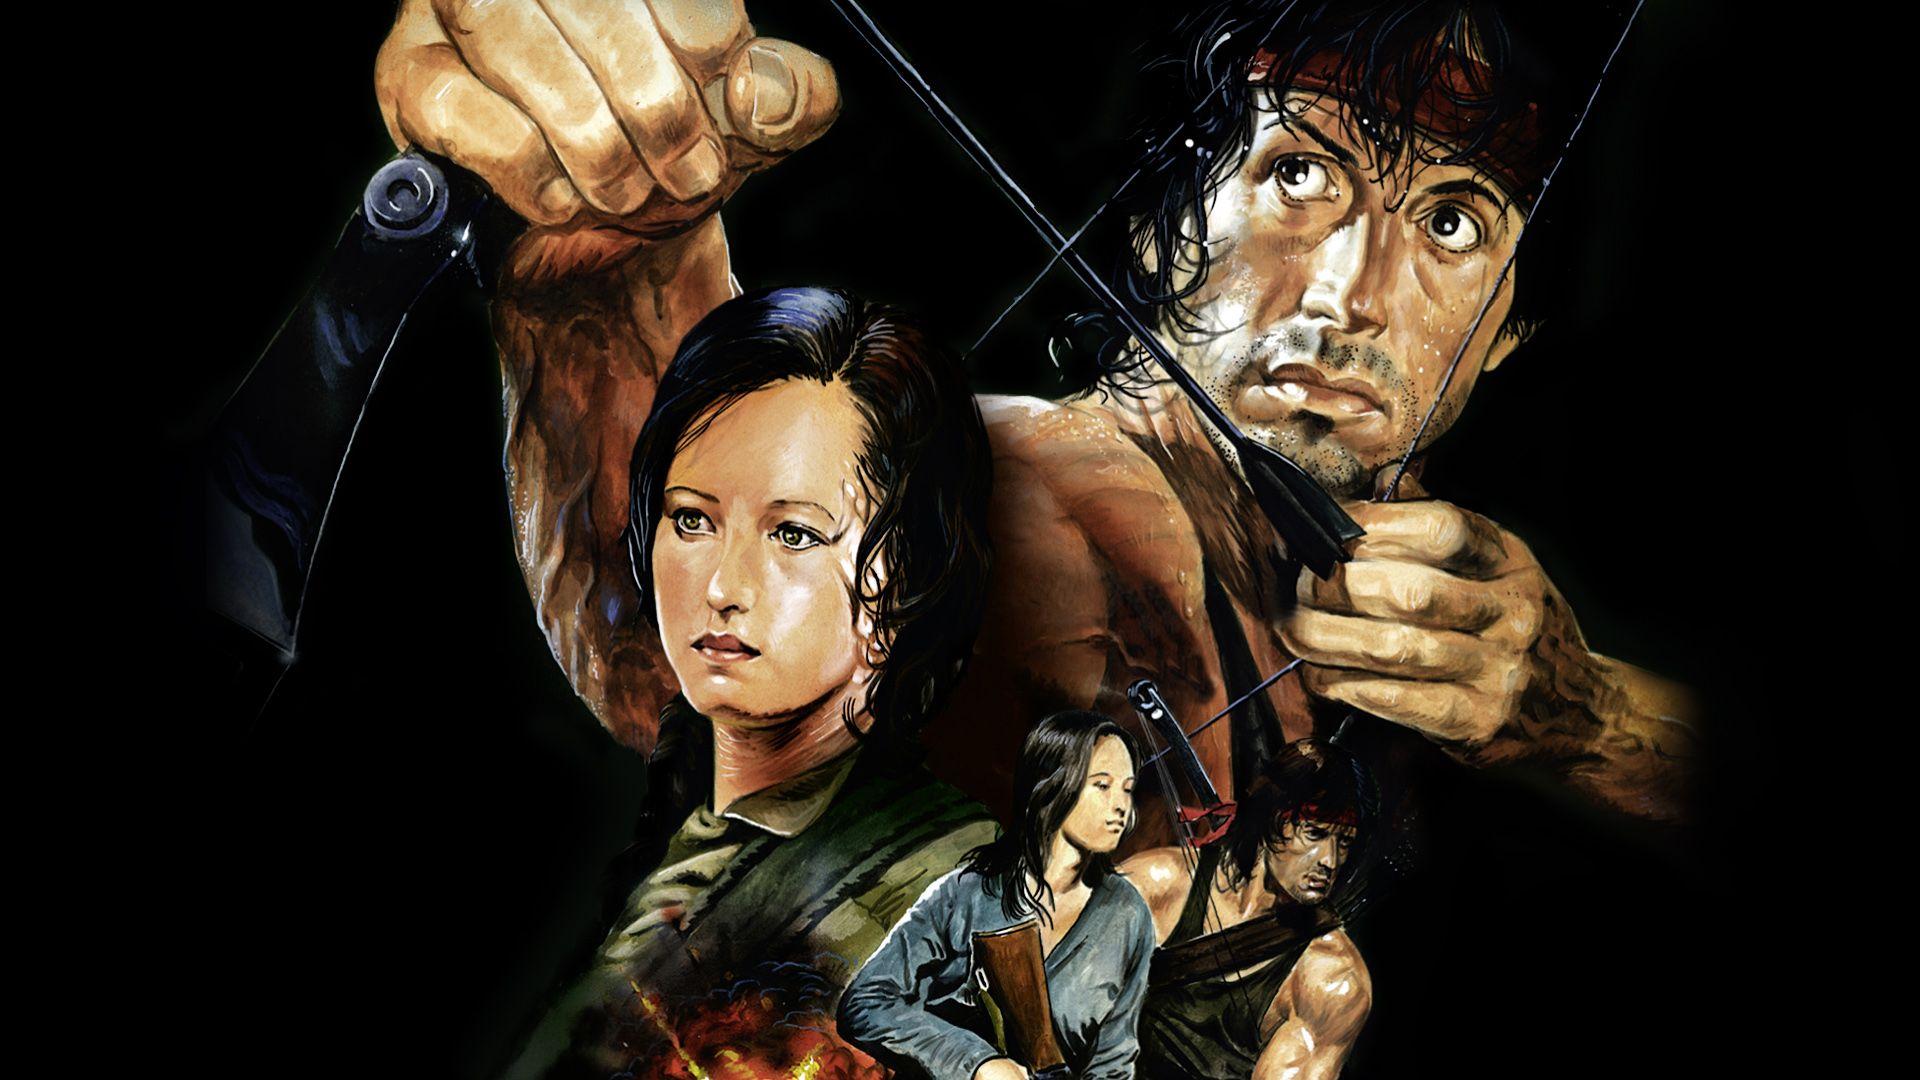 Rambo HD Wallpaper Free Download. Film posters Inspiration in 2019